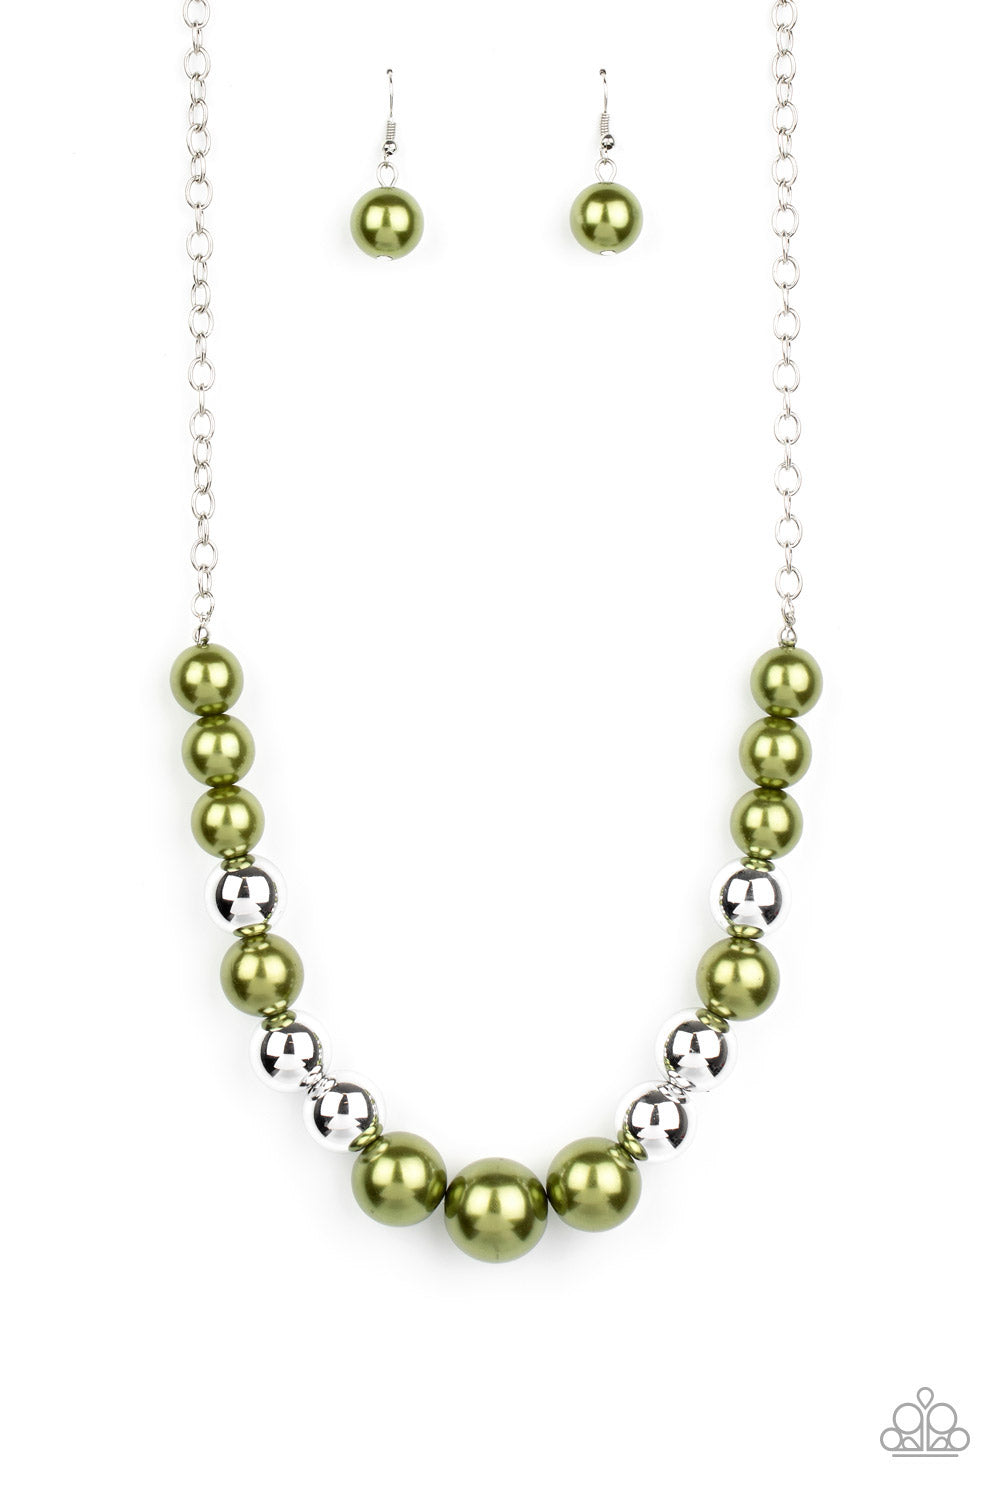 Take Note - green - Paparazzi necklace